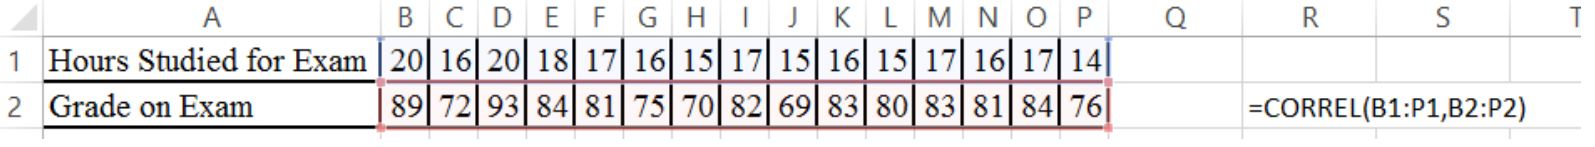 An Excel spreadsheet with the given data table, including labels, entered in rows 1 and 2, columns A through P. Shows the command to calculate correlation: =CORREL(B1:P1,B2:P2)